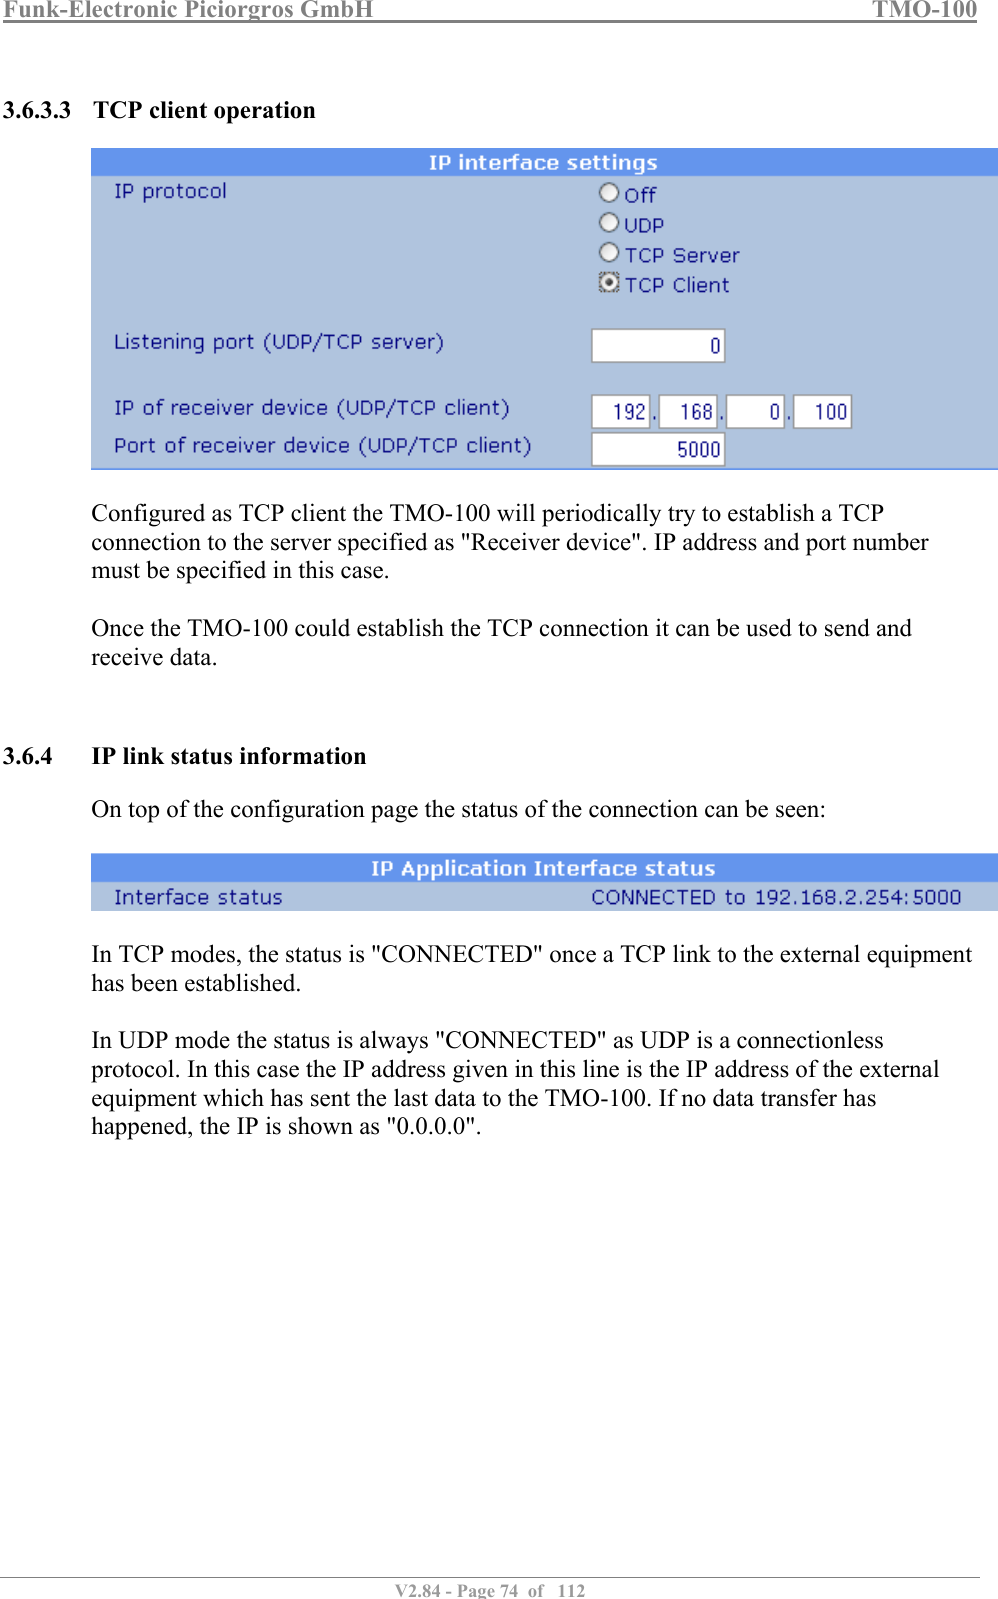 Funk-Electronic Piciorgros GmbH   TMO-100   V2.84 - Page 74  of   112   3.6.3.3 TCP client operation   Configured as TCP client the TMO-100 will periodically try to establish a TCP connection to the server specified as &quot;Receiver device&quot;. IP address and port number must be specified in this case.  Once the TMO-100 could establish the TCP connection it can be used to send and receive data.   3.6.4 IP link status information On top of the configuration page the status of the connection can be seen:    In TCP modes, the status is &quot;CONNECTED&quot; once a TCP link to the external equipment has been established.  In UDP mode the status is always &quot;CONNECTED&quot; as UDP is a connectionless protocol. In this case the IP address given in this line is the IP address of the external equipment which has sent the last data to the TMO-100. If no data transfer has happened, the IP is shown as &quot;0.0.0.0&quot;.  